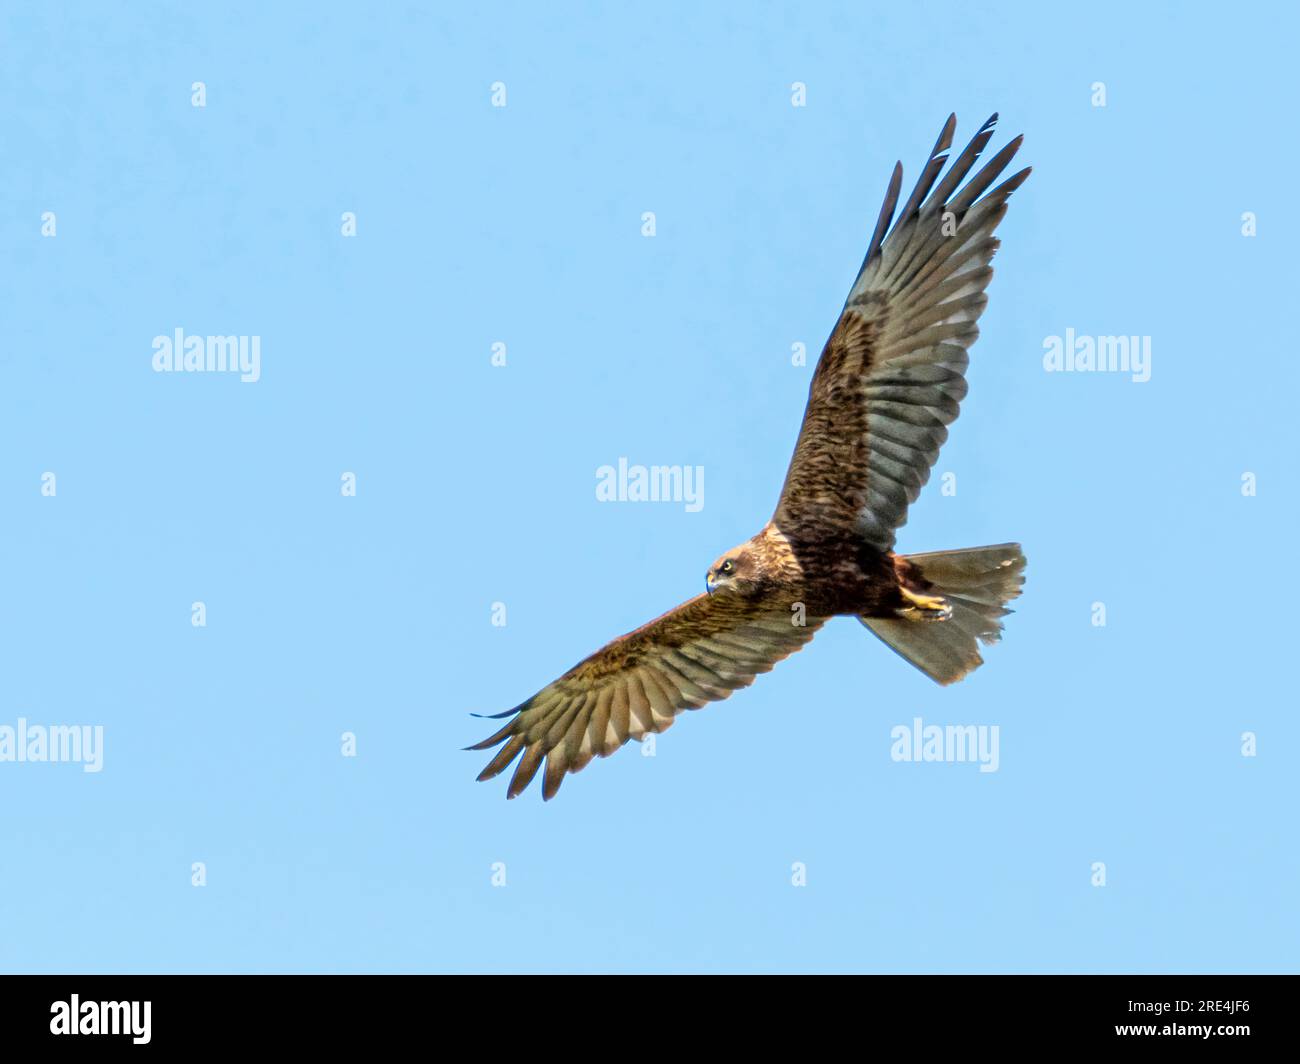 Isolated close up portrait of a single adult western marsh harrier bird in the wild on a blue background of the sky- Armenia Stock Photo